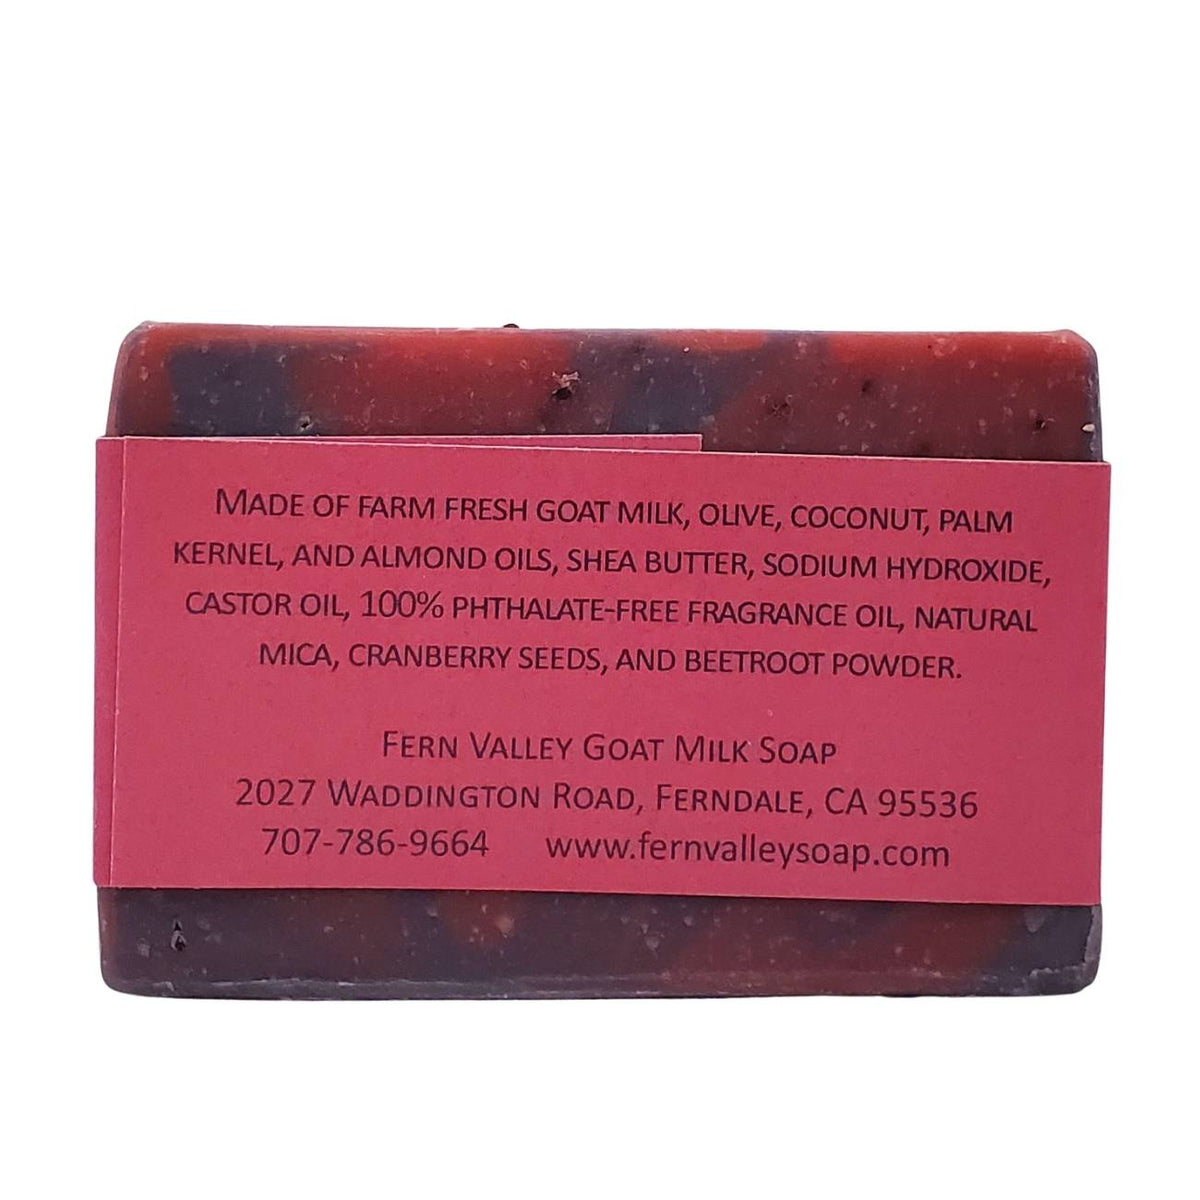 Natural Goat Milk Soap | Exfoliating Cranberry-Seed Scrub | Divine - Musky Floral Scent